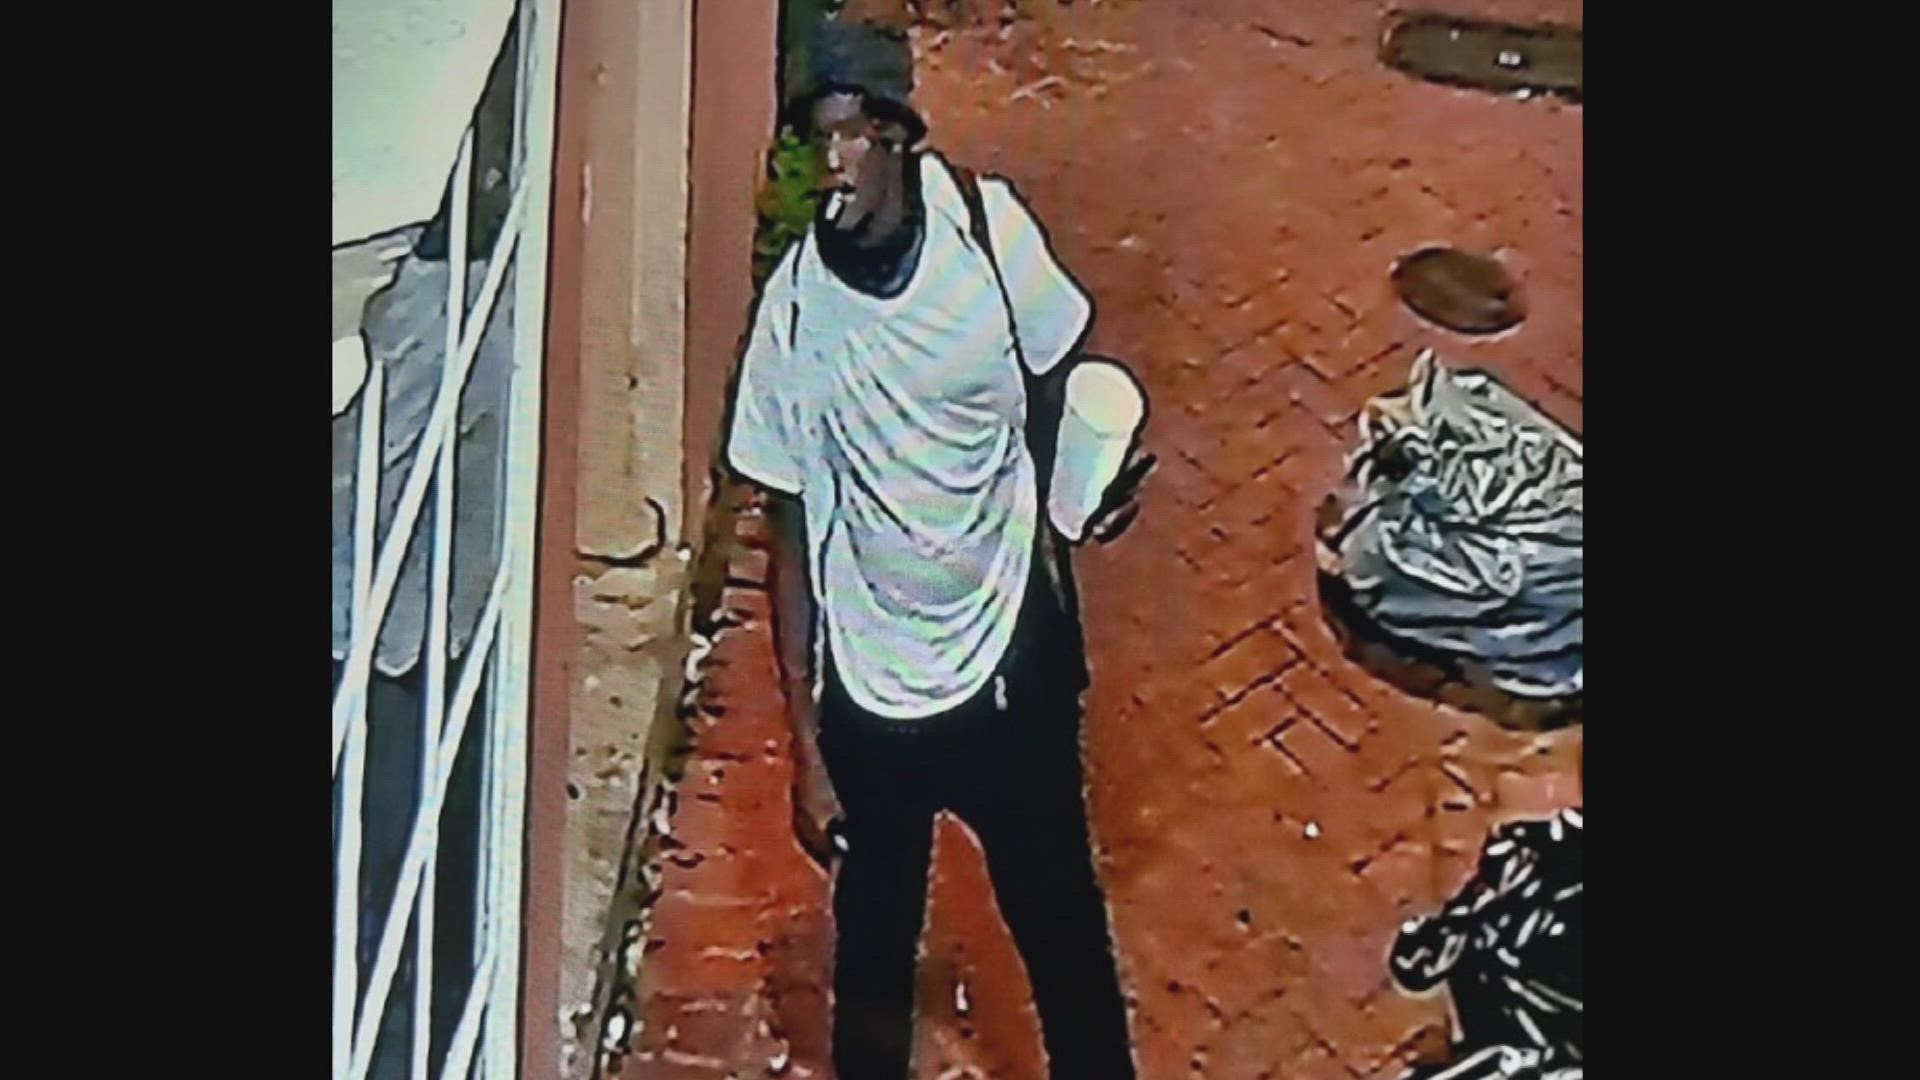 Police have released a photo of a man suspected in an early morning killing in New Orleans' French Quarter.